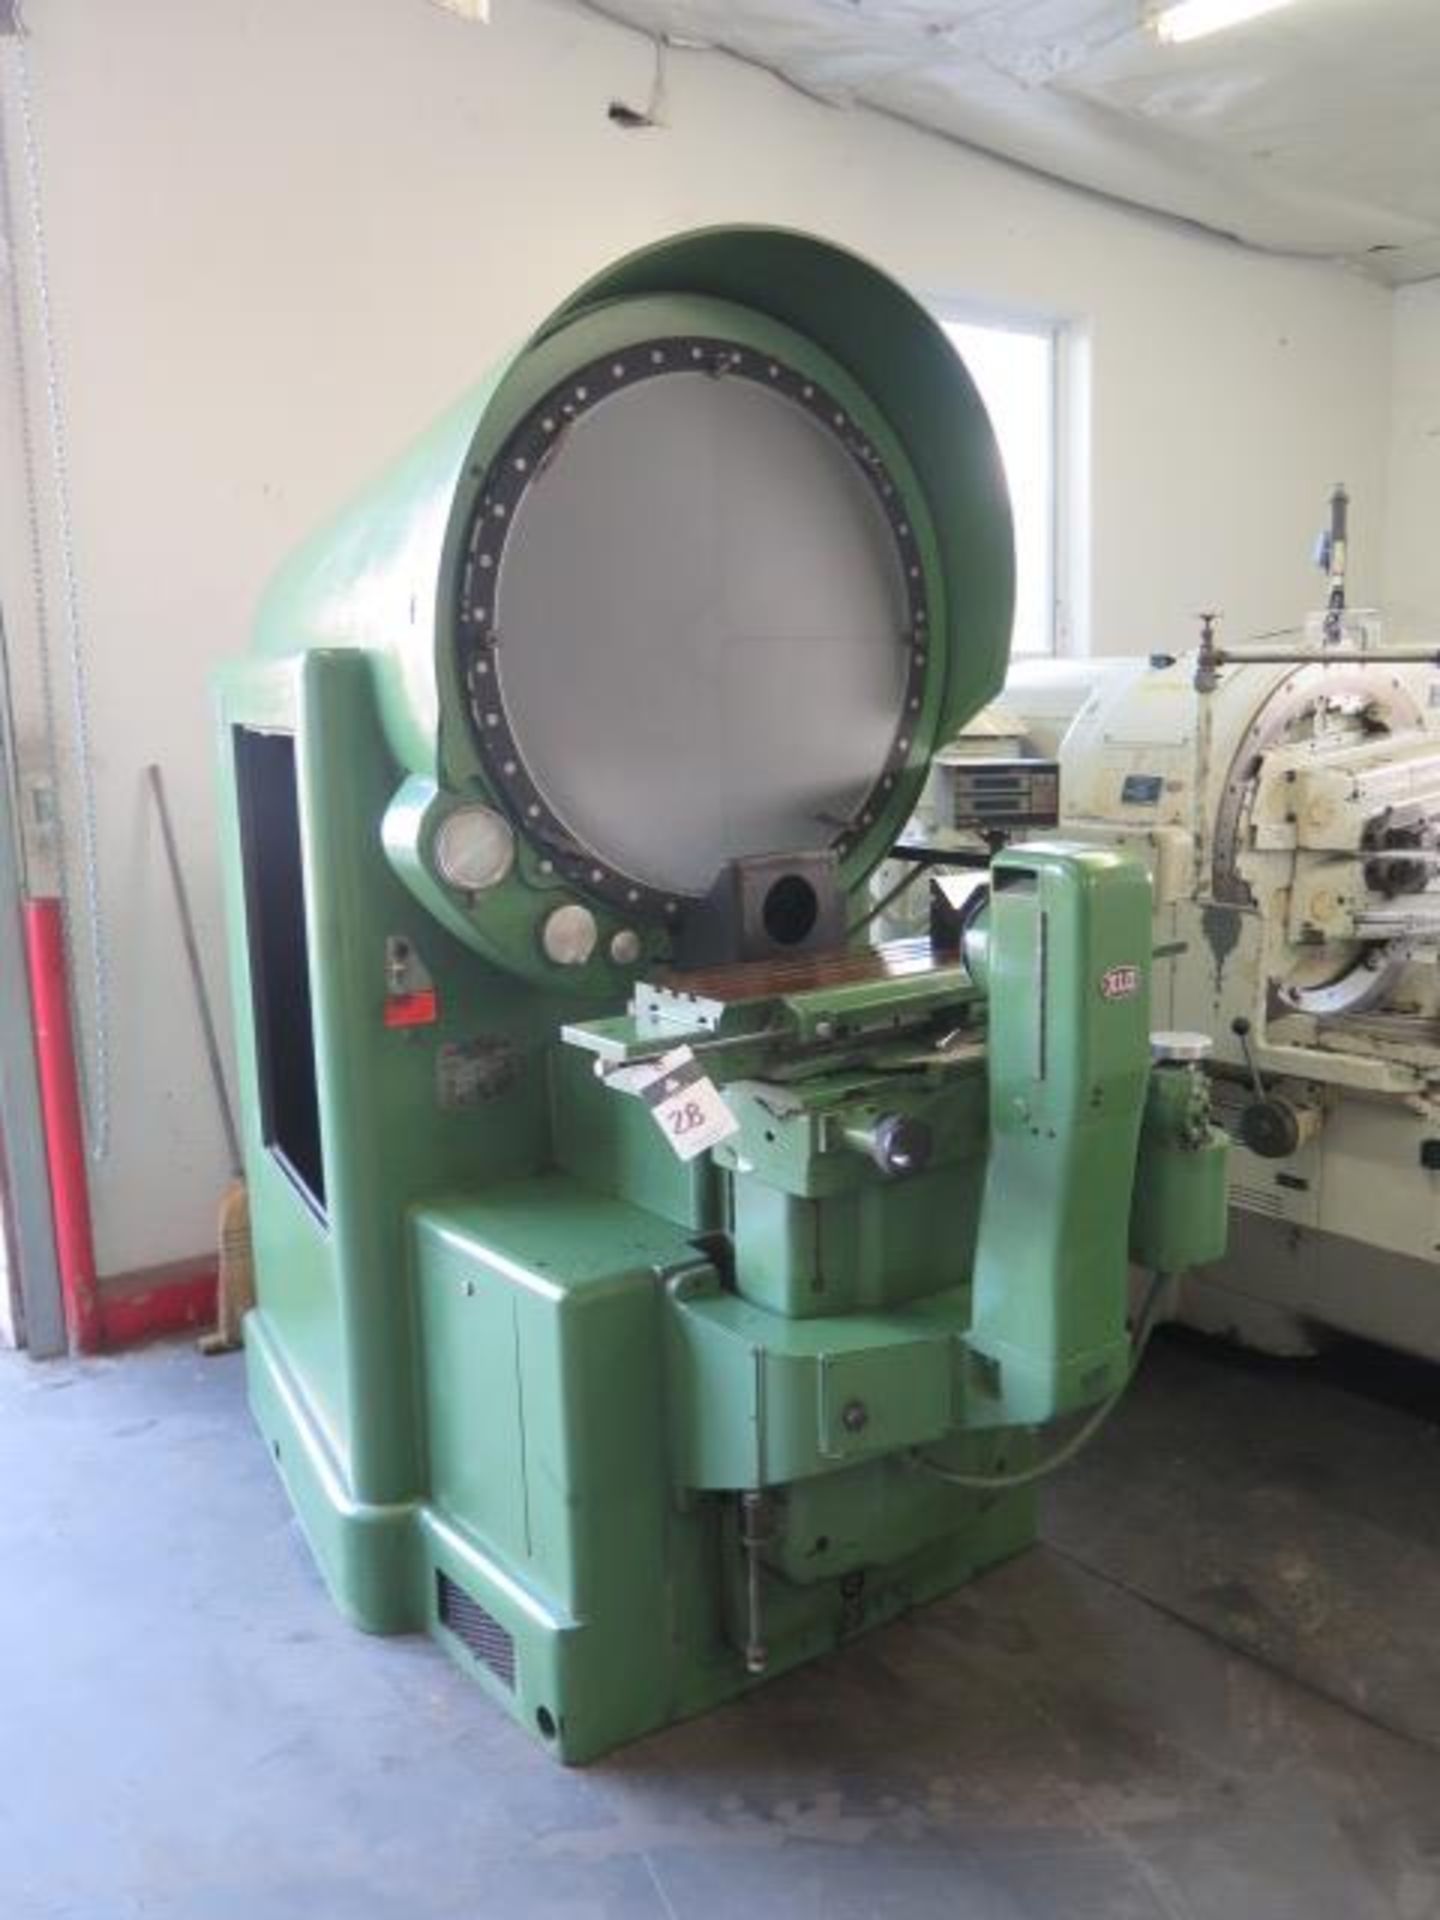 Ex-Cell-O mdl. 30-826 30" Floor Model Optical Comparator s/n 8260270 w/ Acu-Rite Qwikcount DRO, 10X,